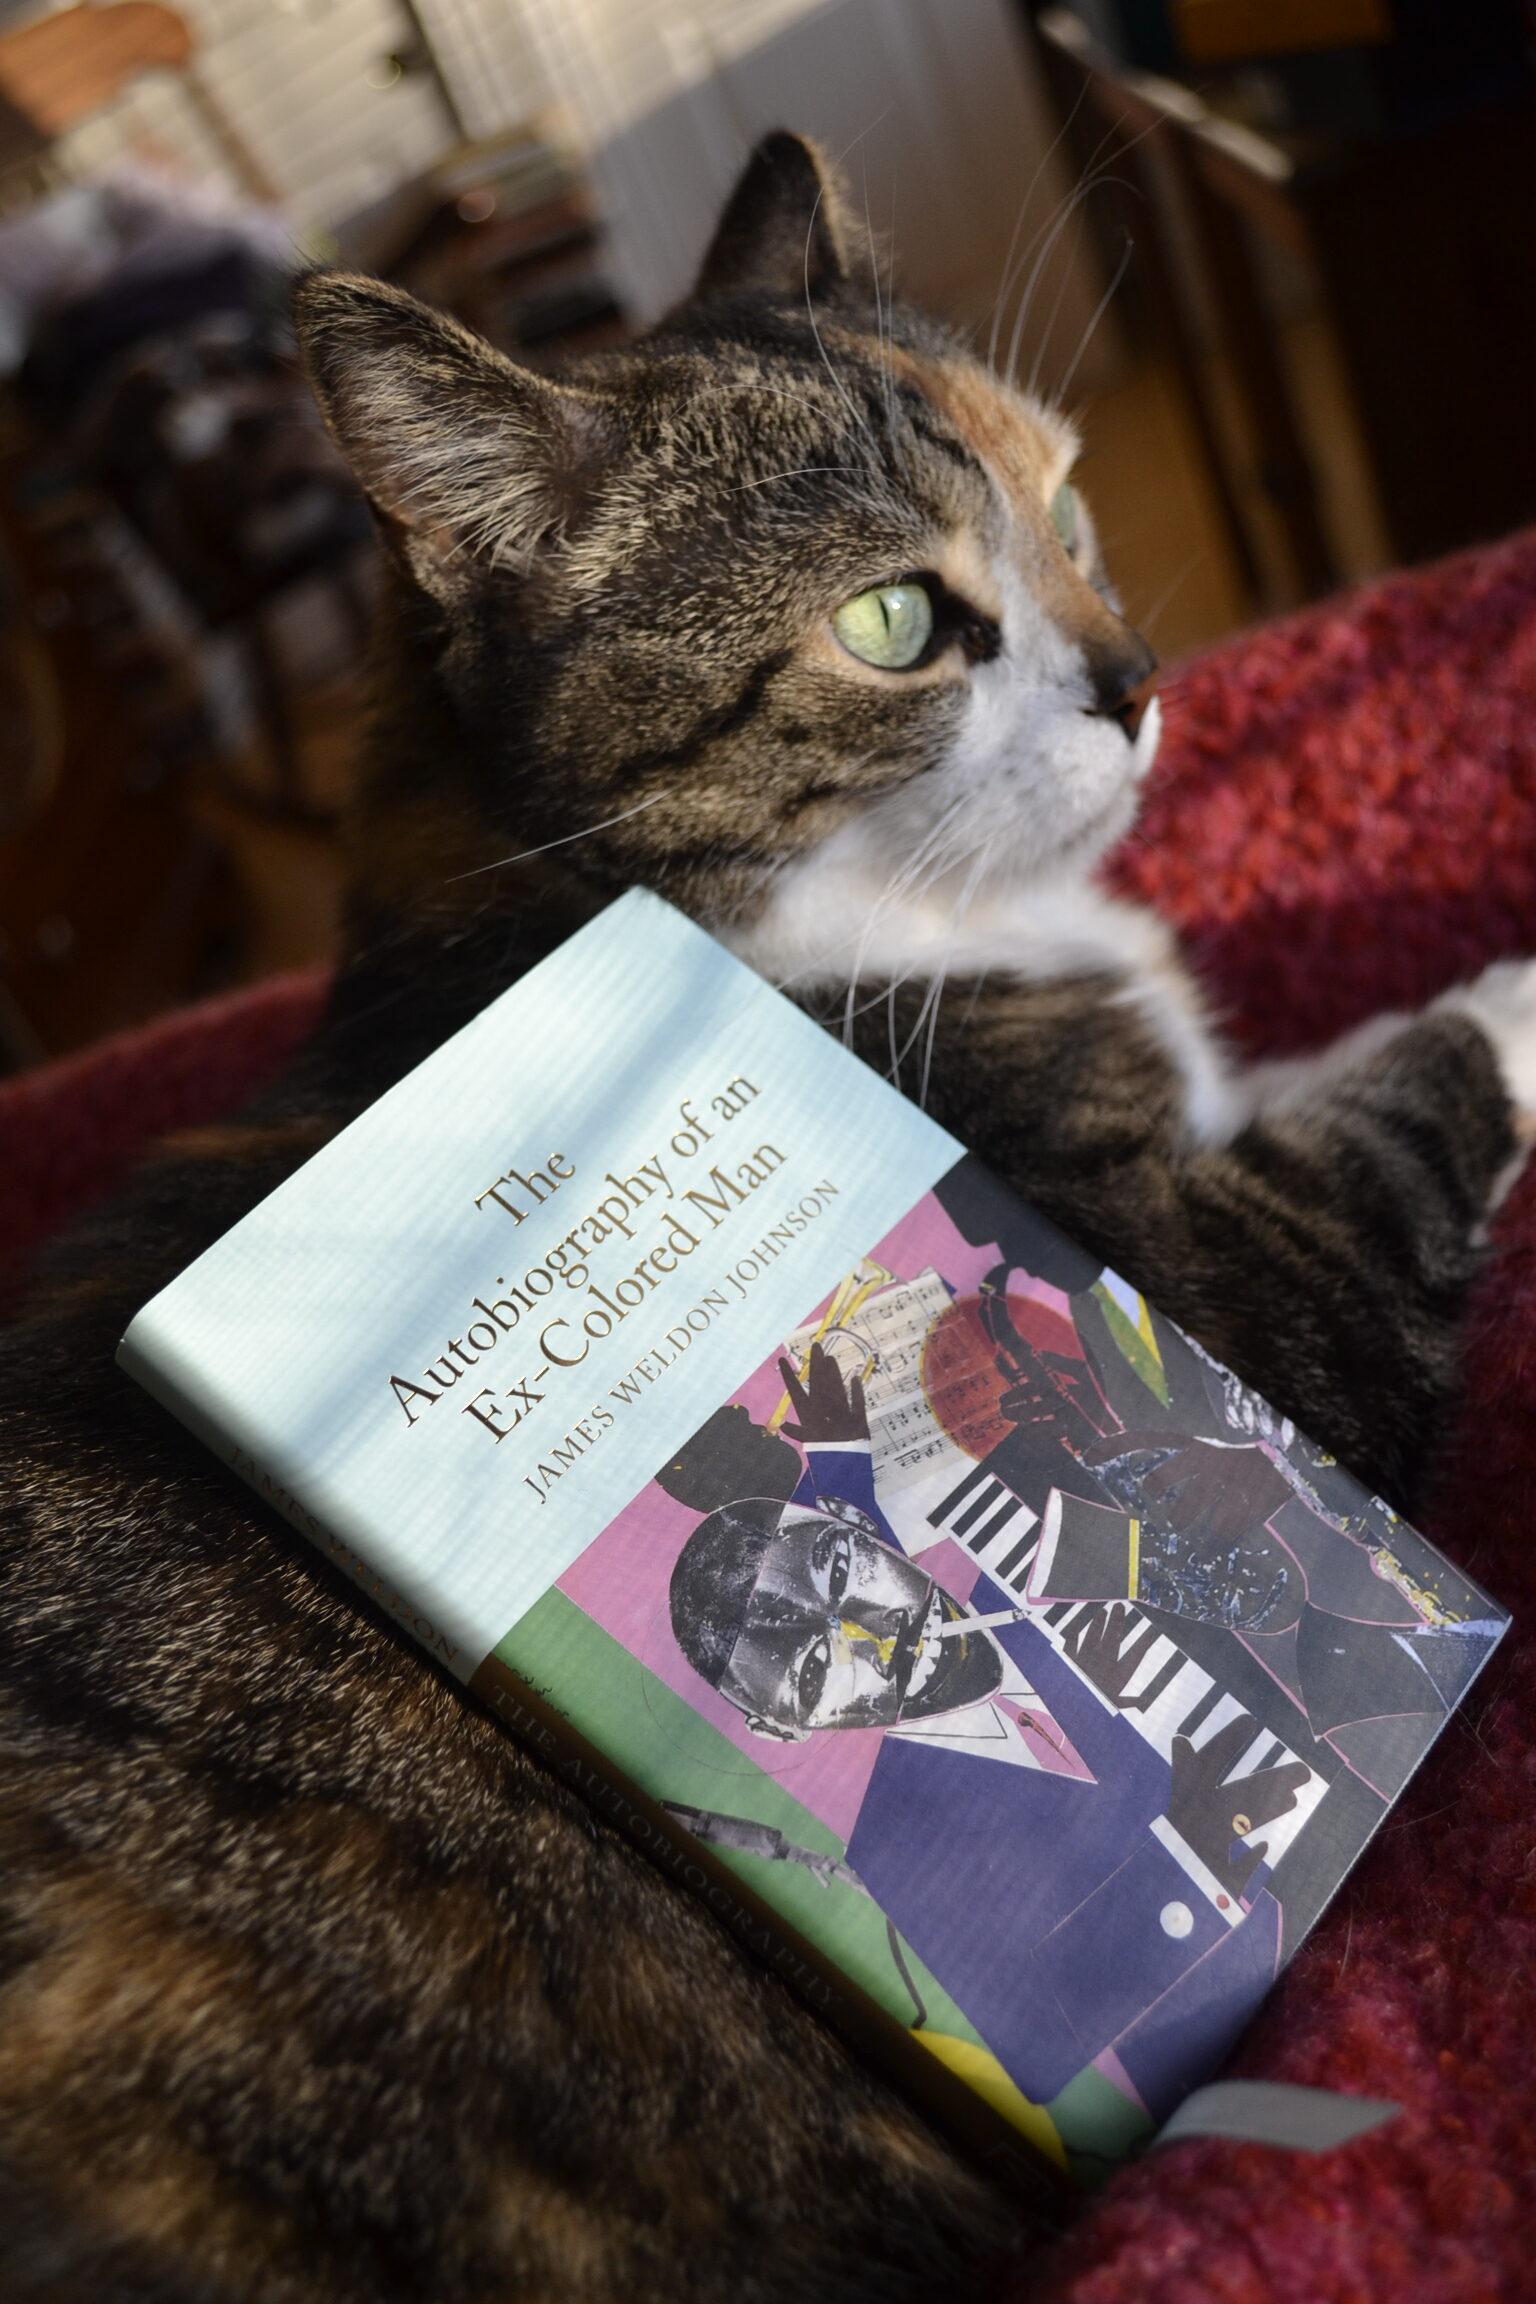 The Autobiography of an Ex-Colored Man lies on the shoulders of a calico tabby cat.